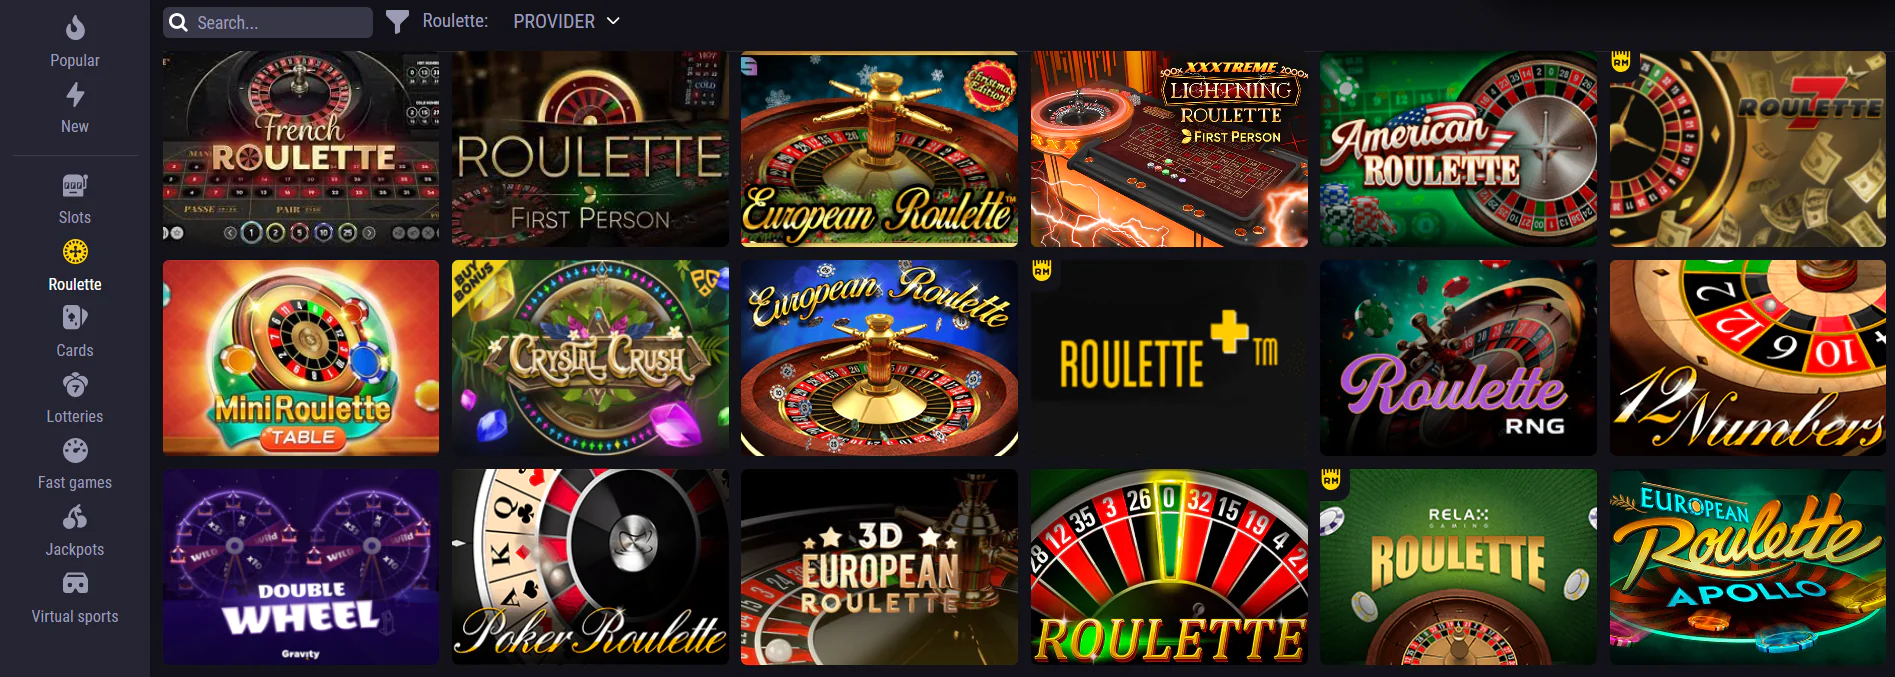 Play Roulette on Betandreas